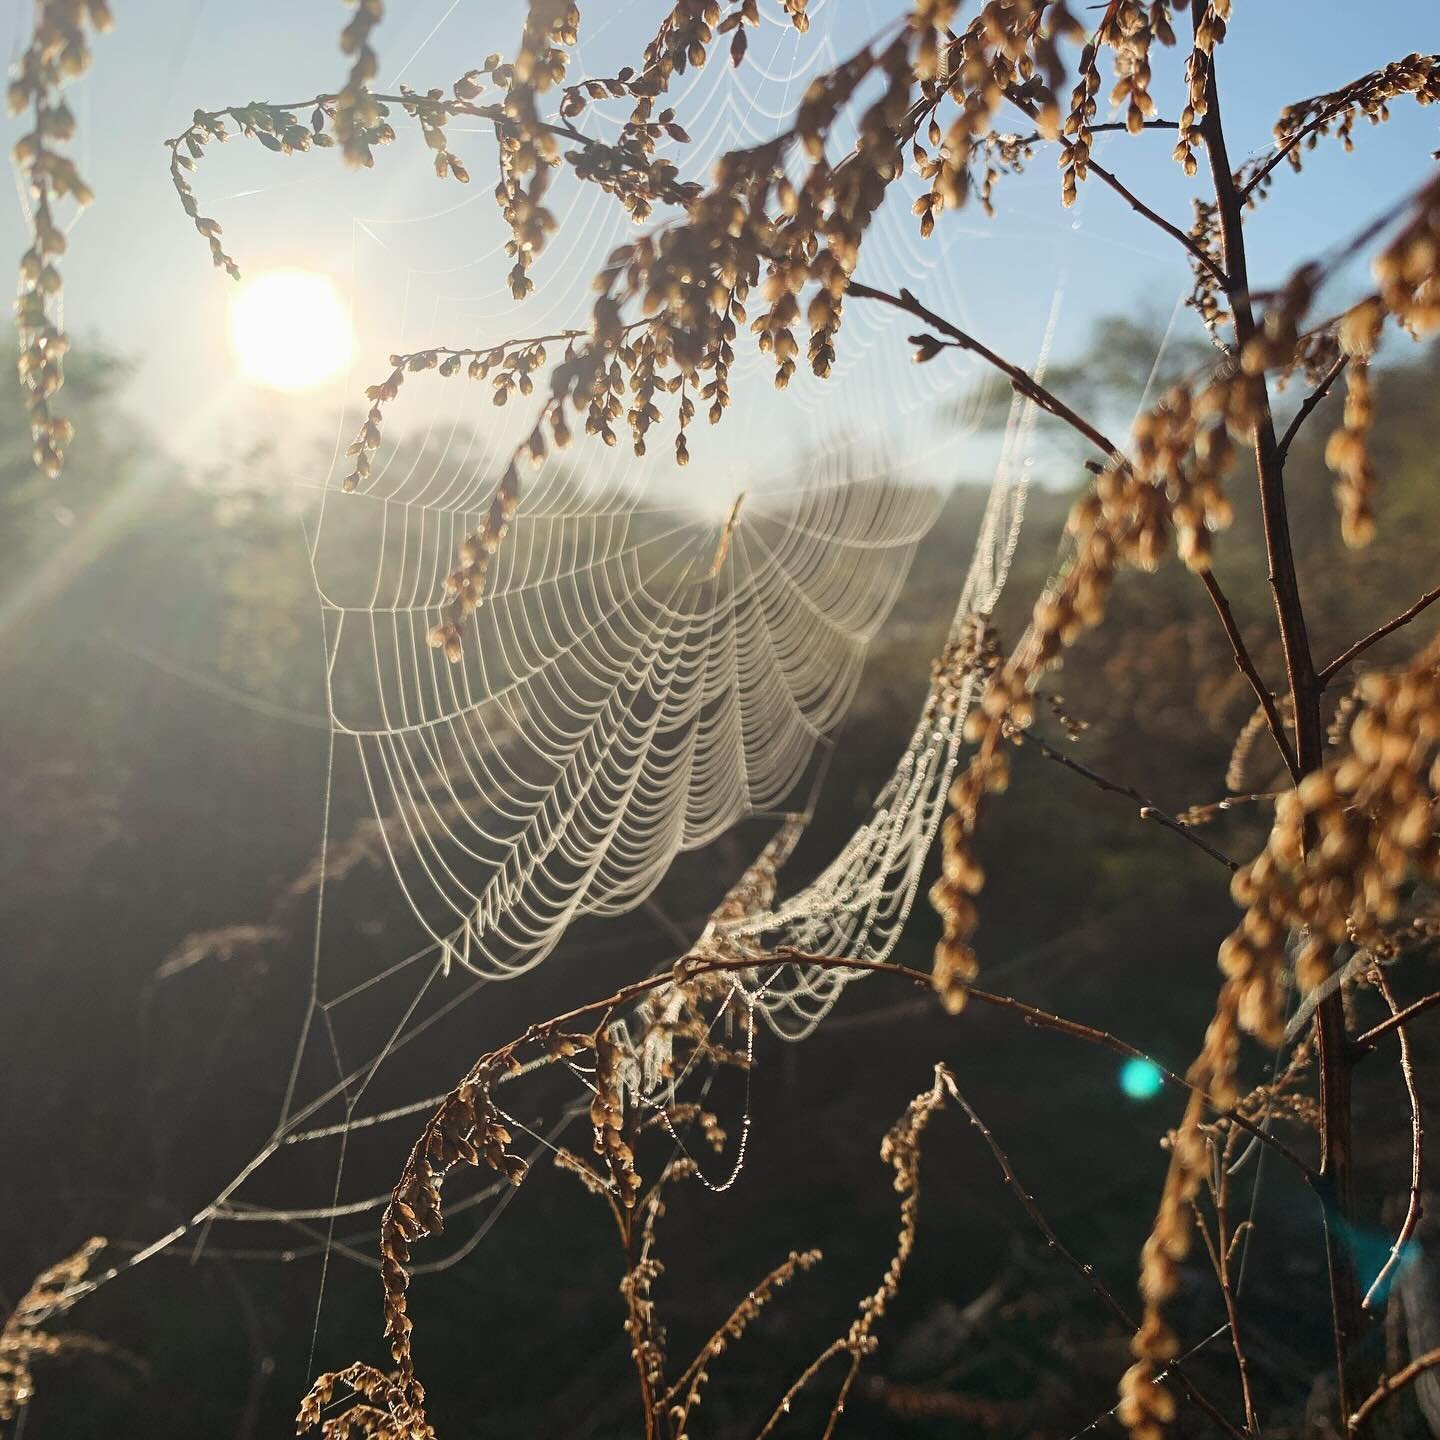 Someone was hard at work last night! Great way to start the day! #spiderverse #spiderweb #morningdew